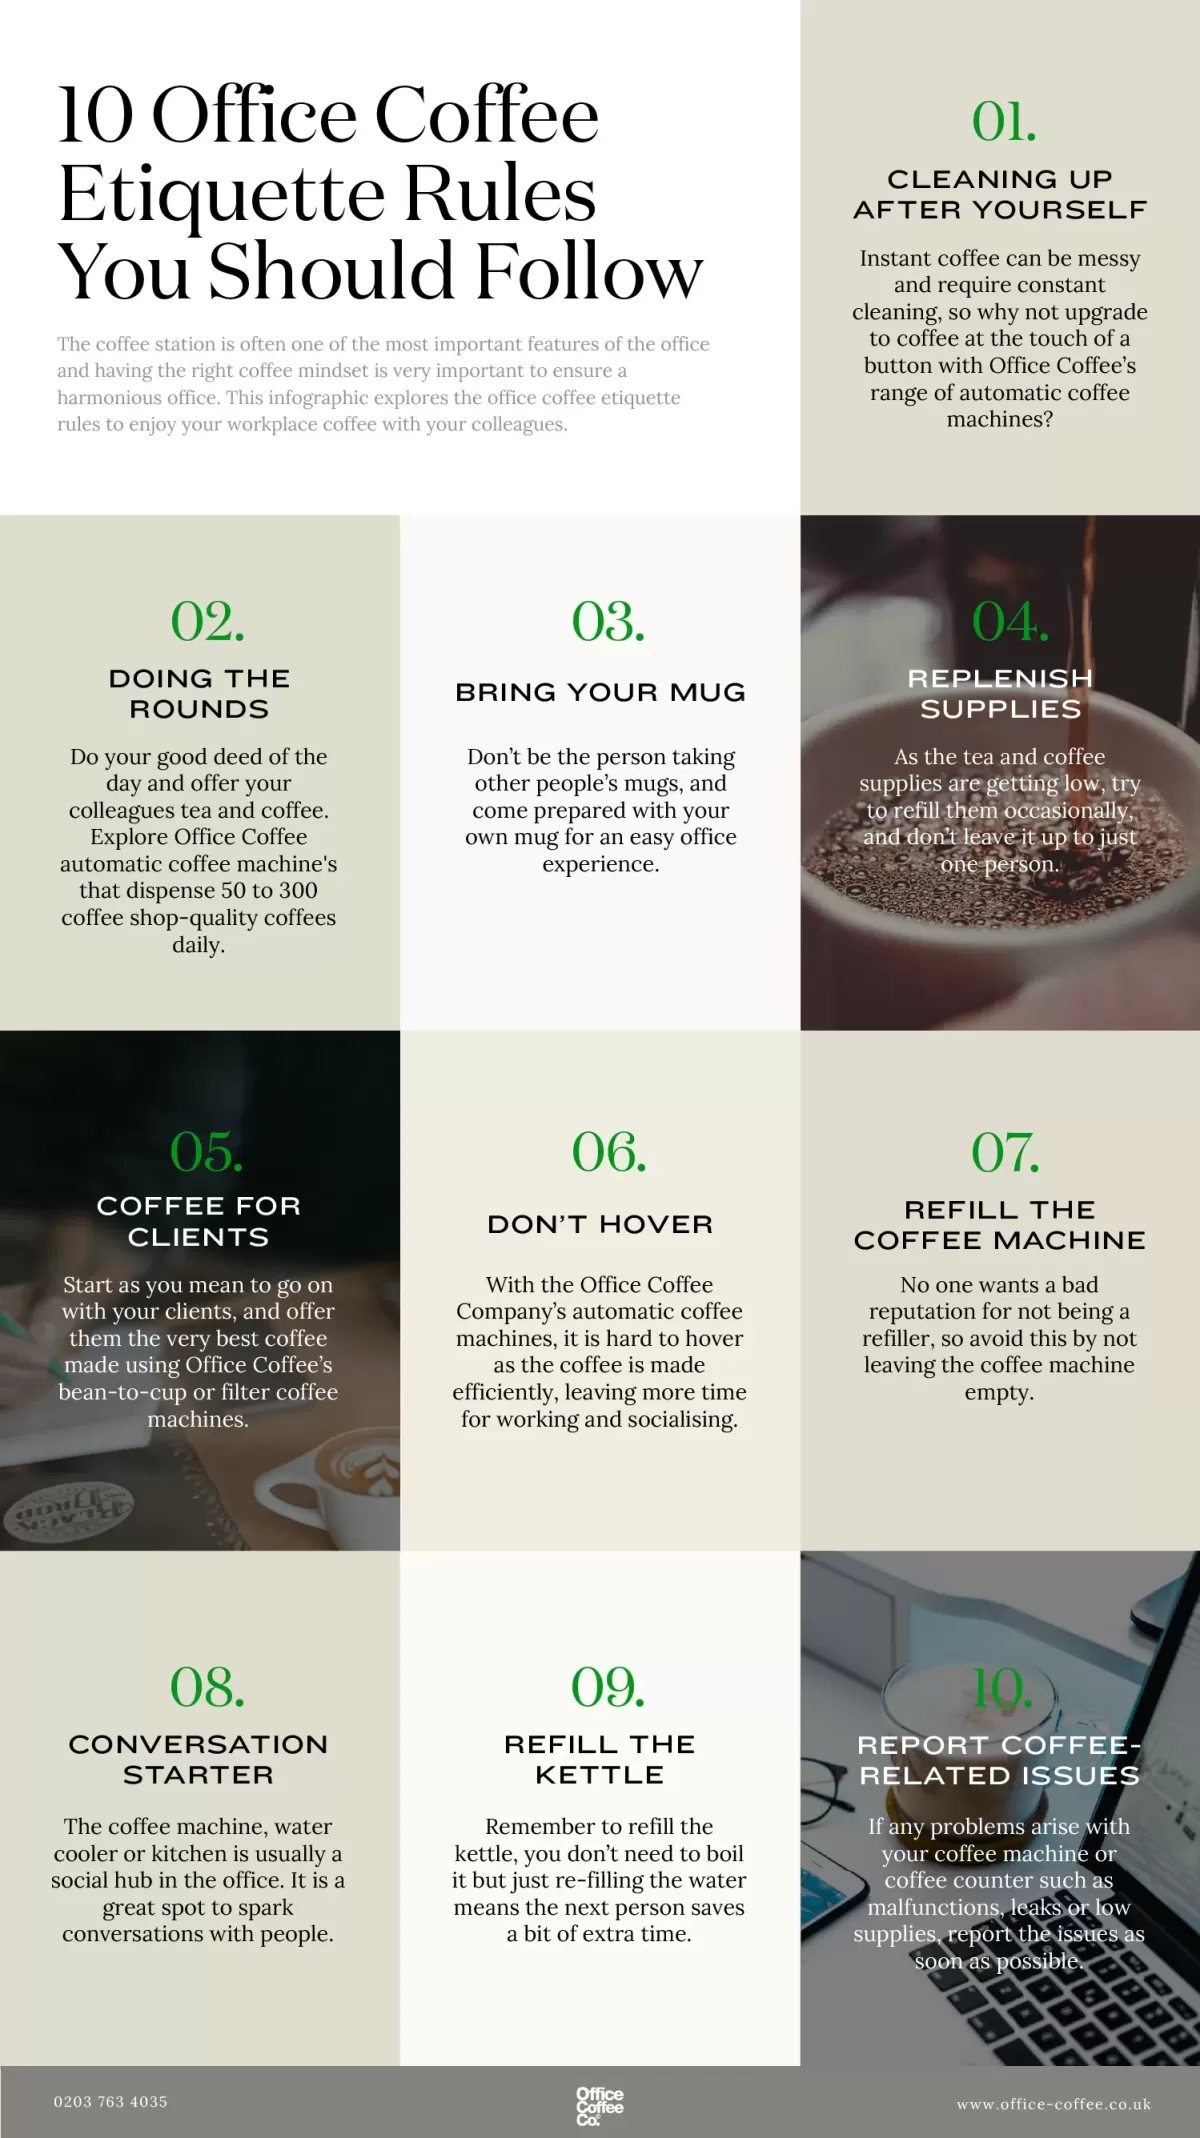 Office Coffee Etiquette Infographic3